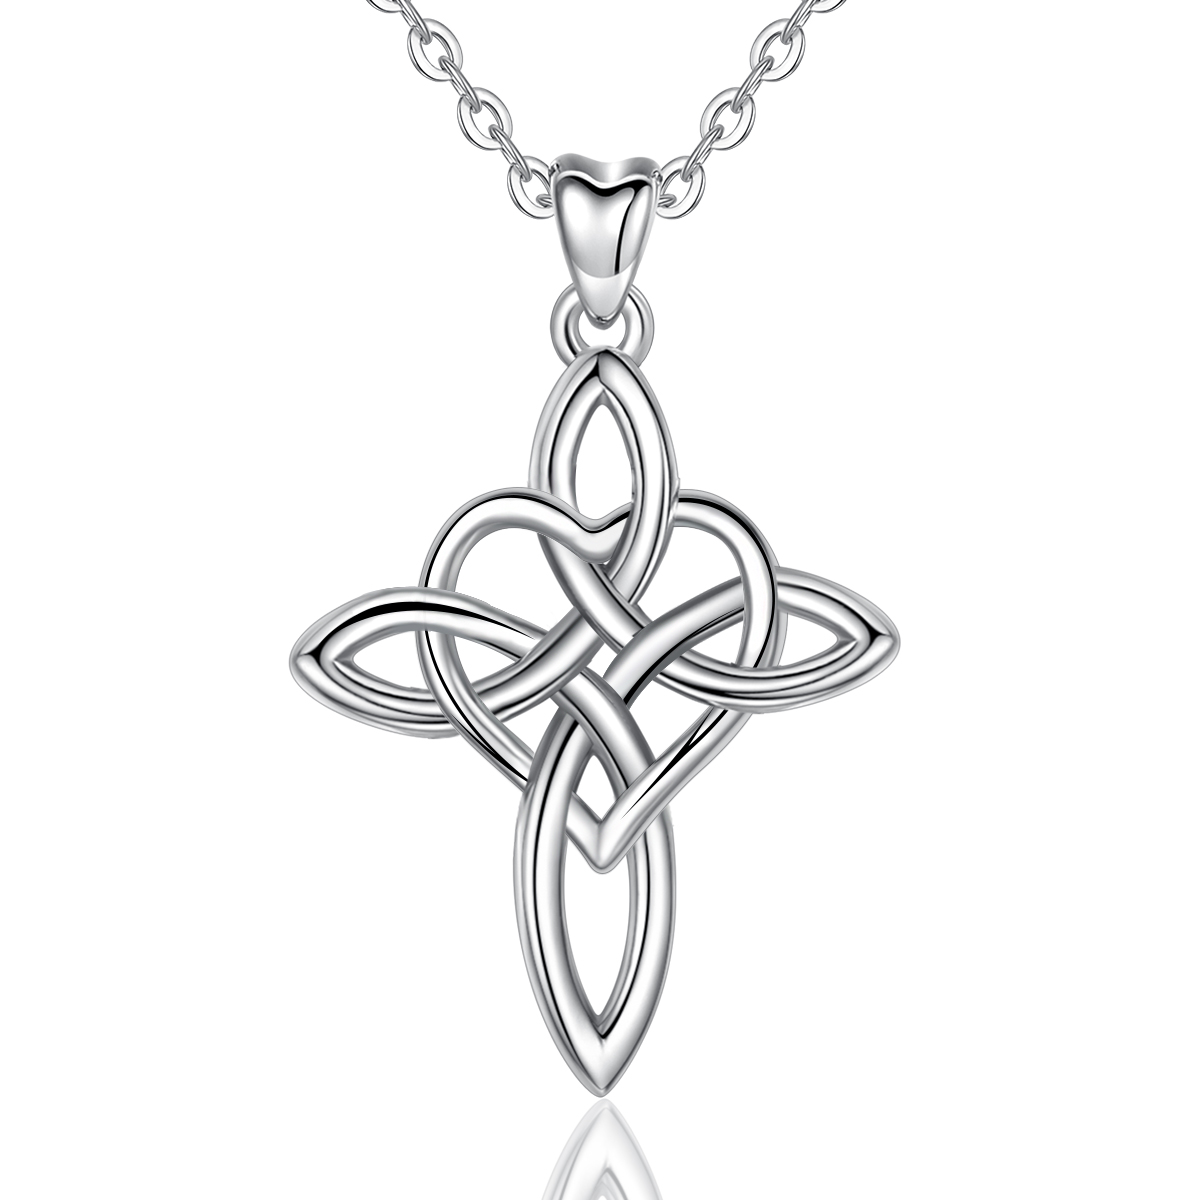 Merryshine Jewelry Minimalism Style S925 Sterling Silver Celtic Knot Cross Necklace for Women